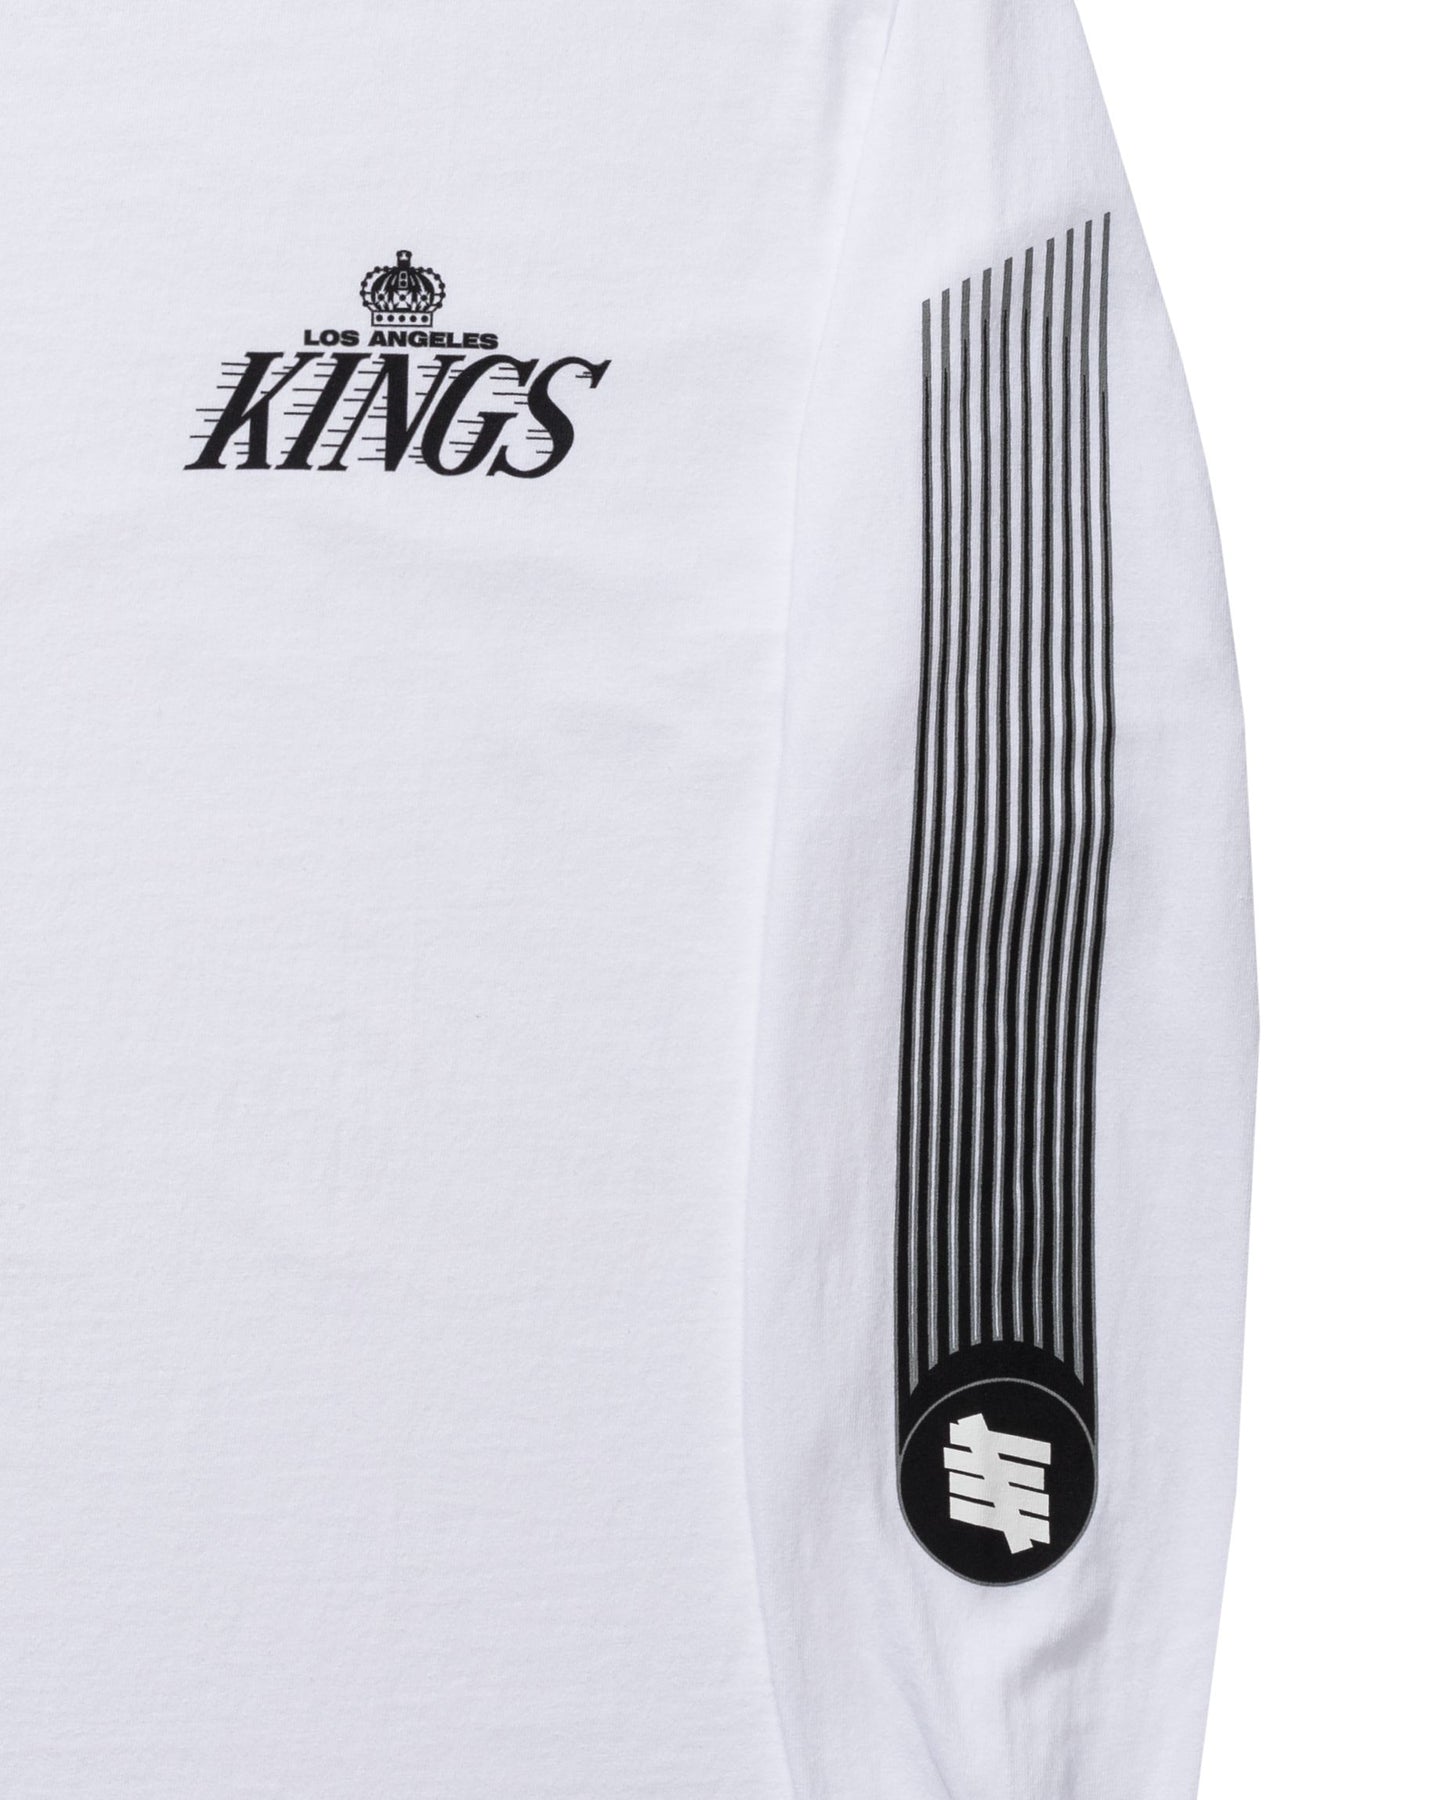 Los Angeles Kings x UNDEFEATED Capsule Collection